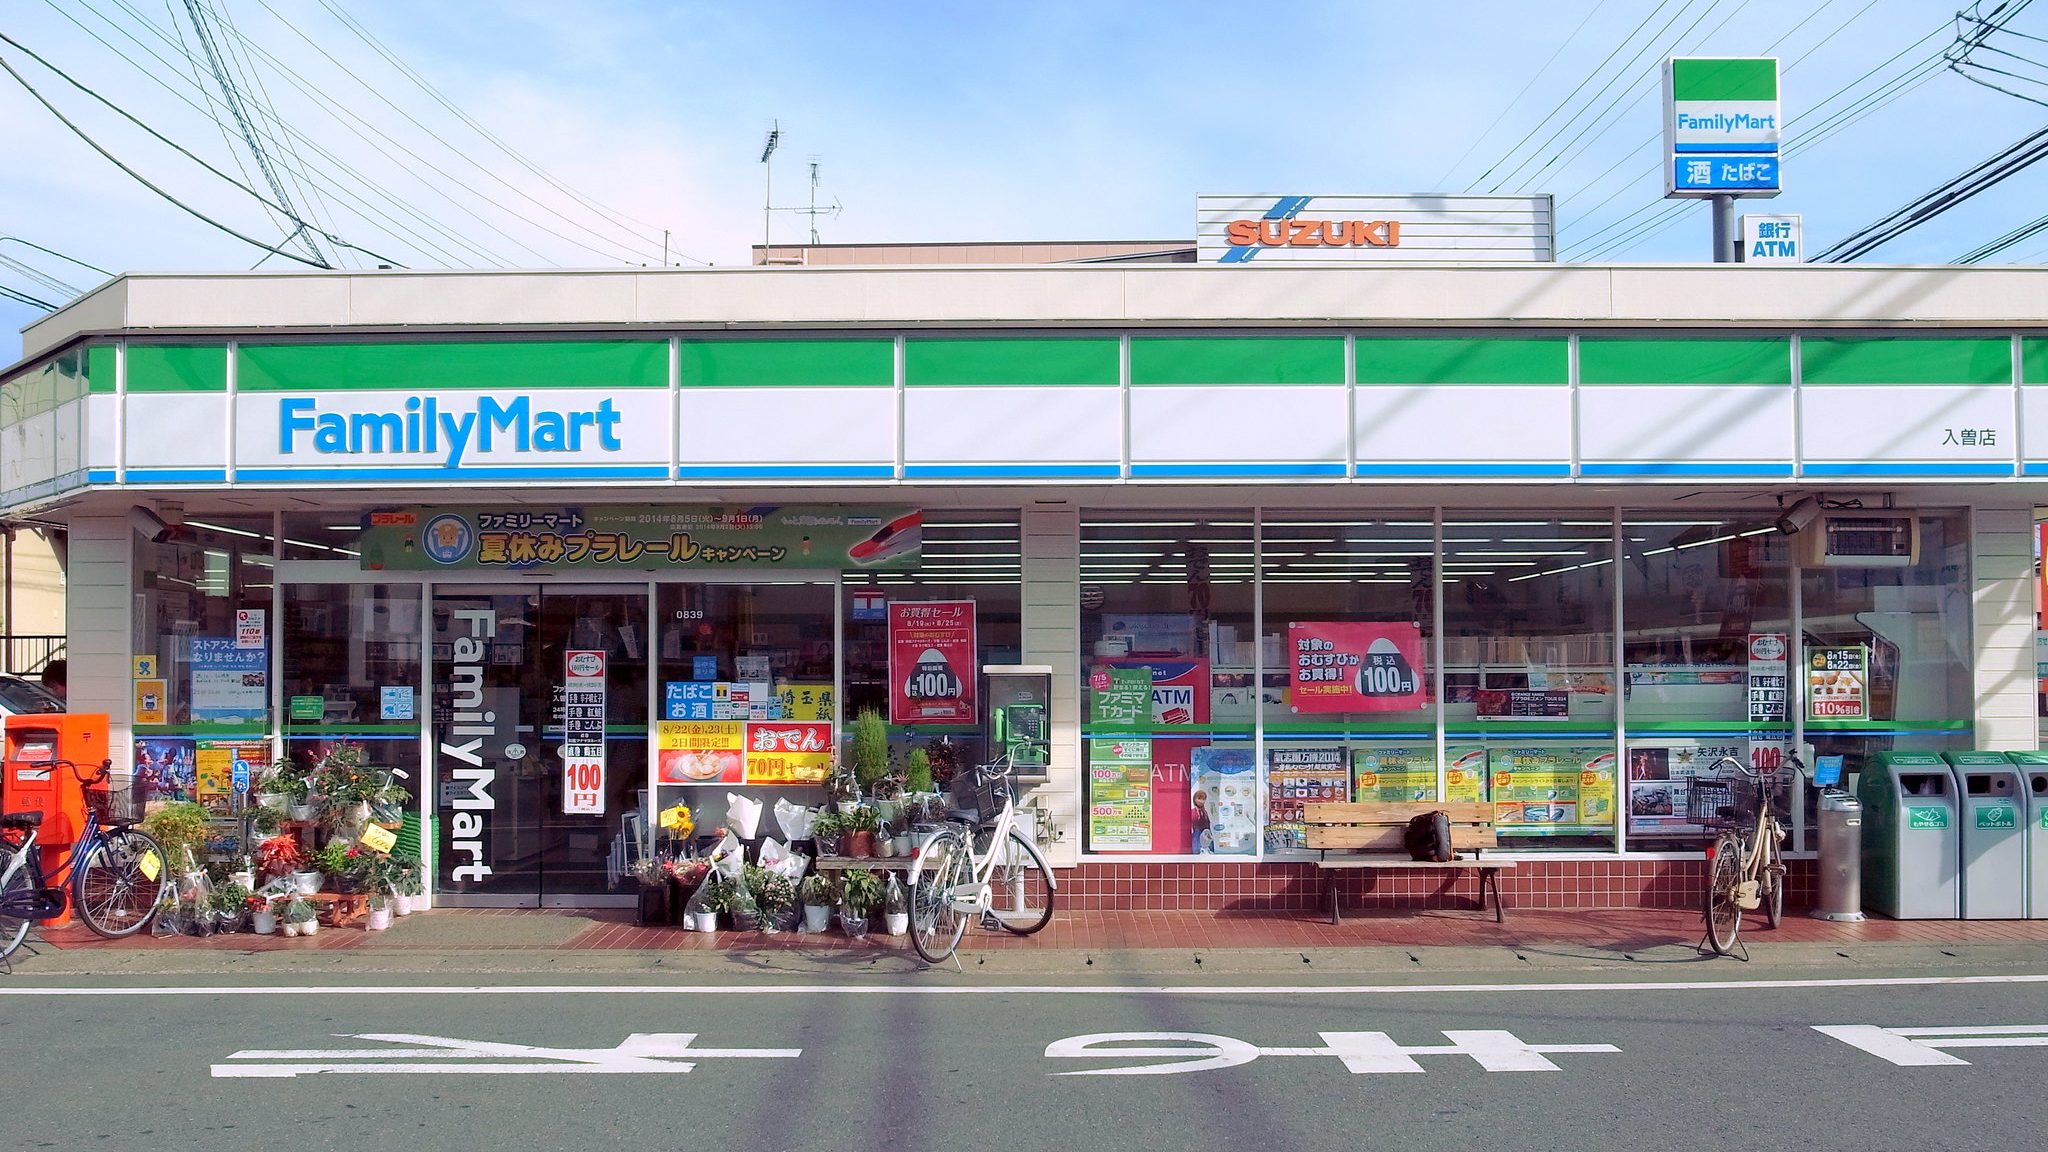 familymart-in-japan-using-cleaning-robots